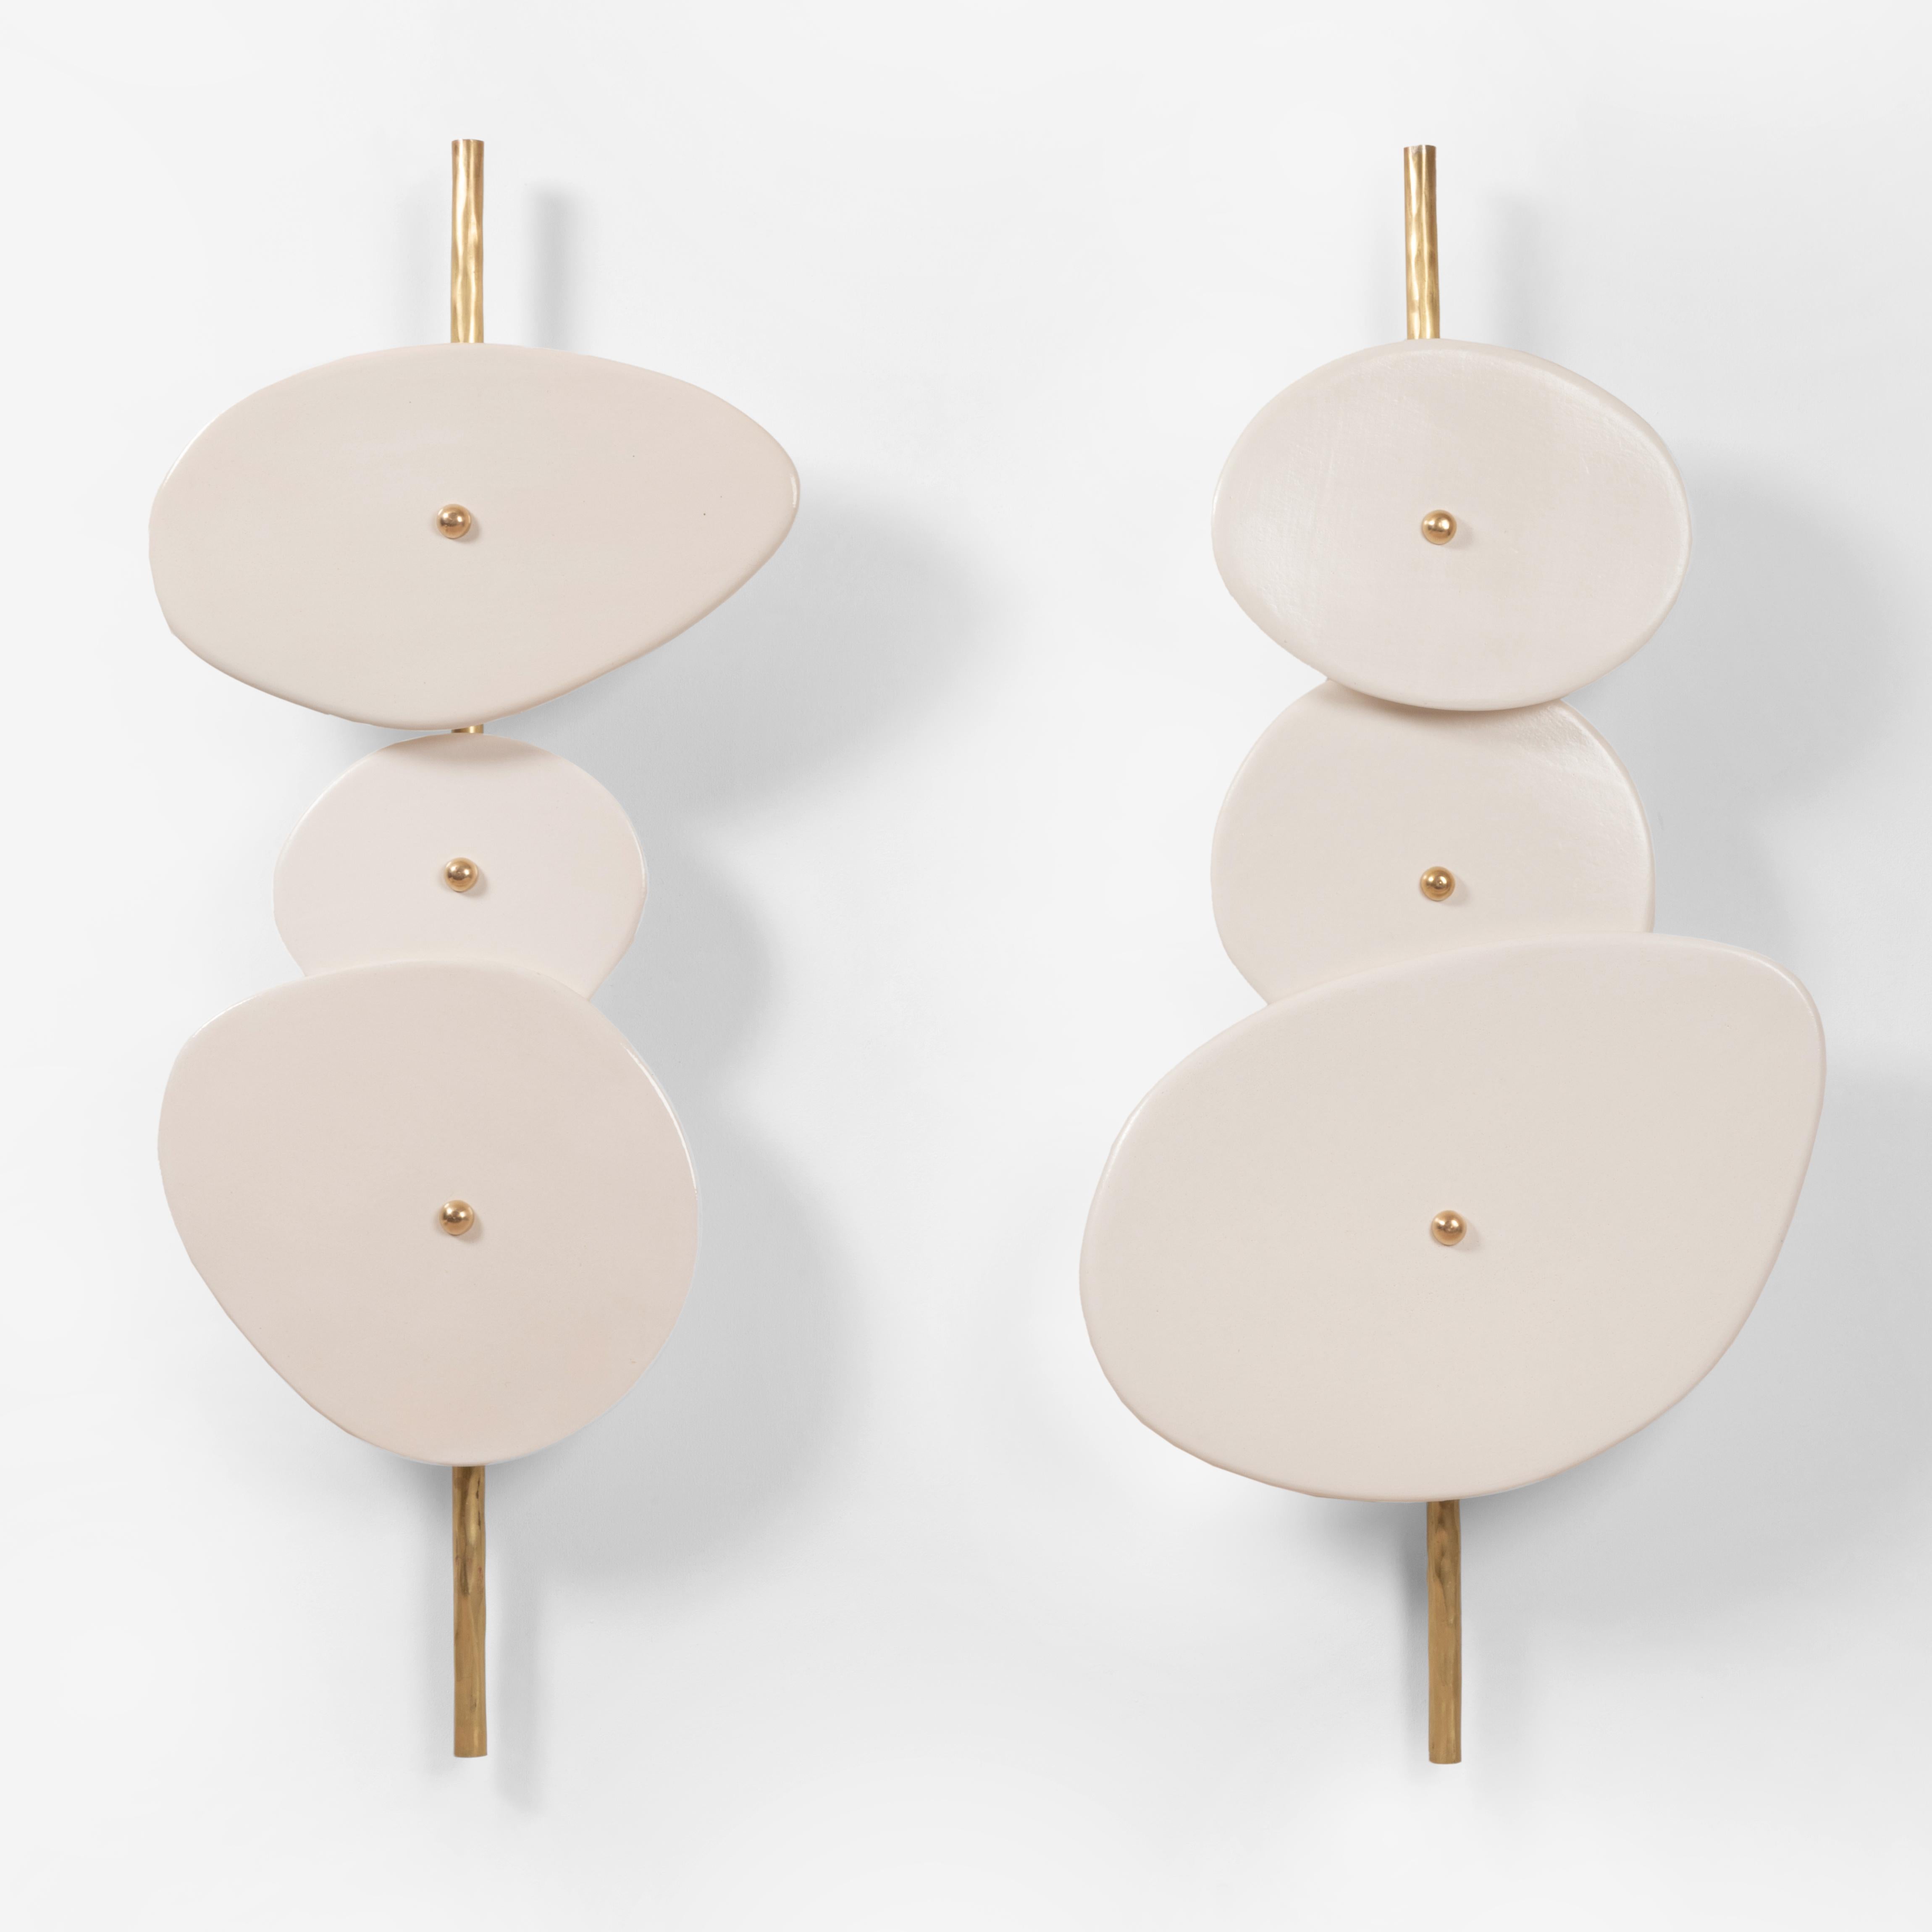 Set of 2 Achille Wall Sconces by Elsa Foulon
Unique Pieces
Dimensions: H 75 cm
Materials: ceramic, brass

All our lamps can be wired according to each country. If sold to the USA it will be wired for the USA for instance.

Elsa Foulon, before